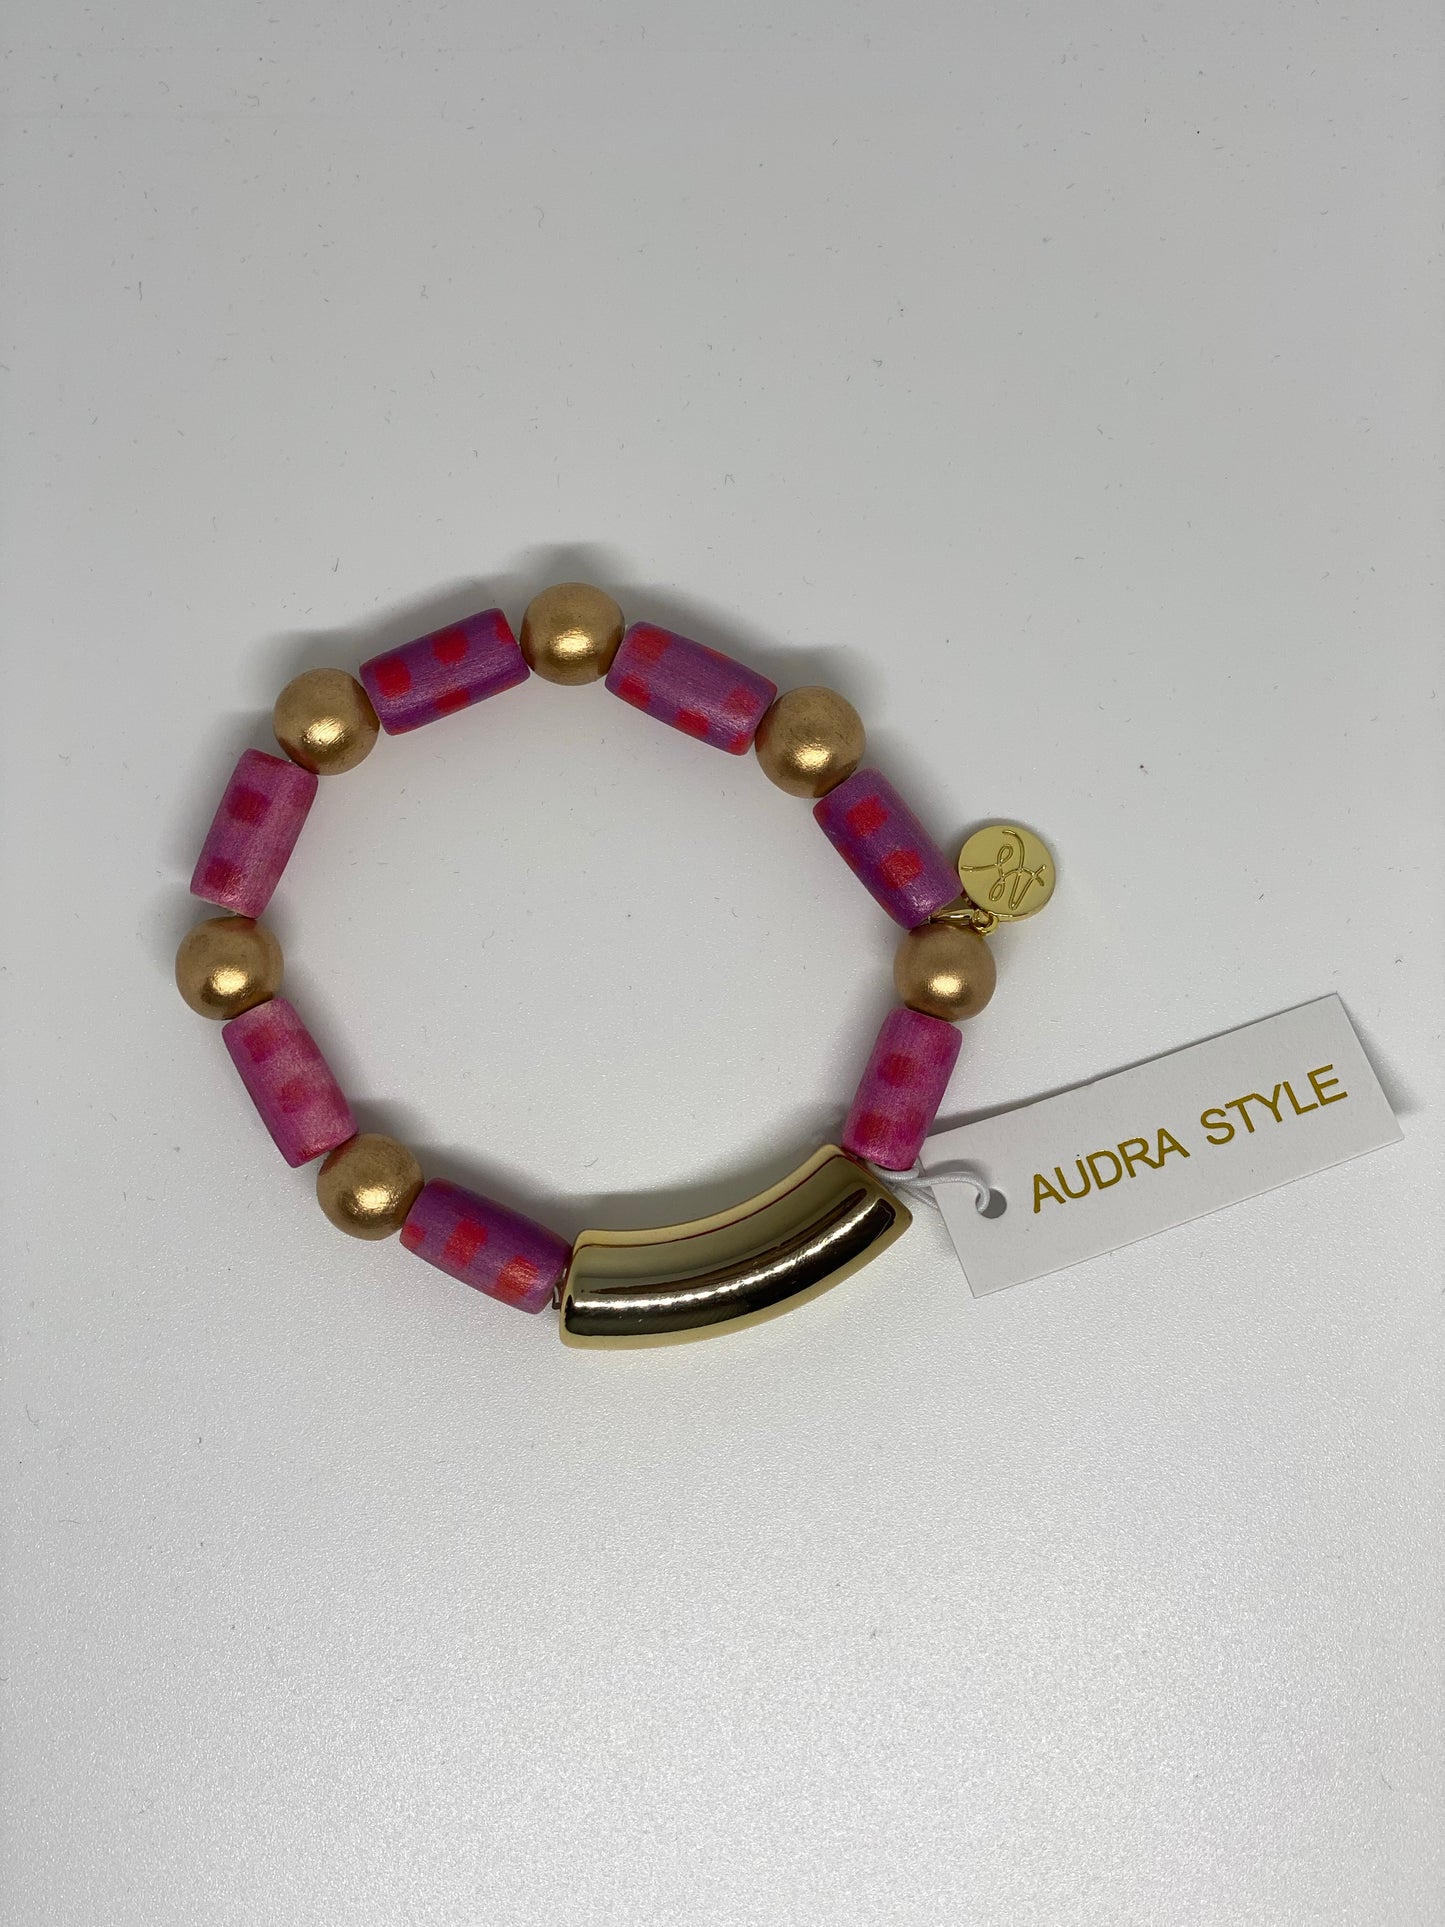 Audra Style Pink and Red Tube Bracelet